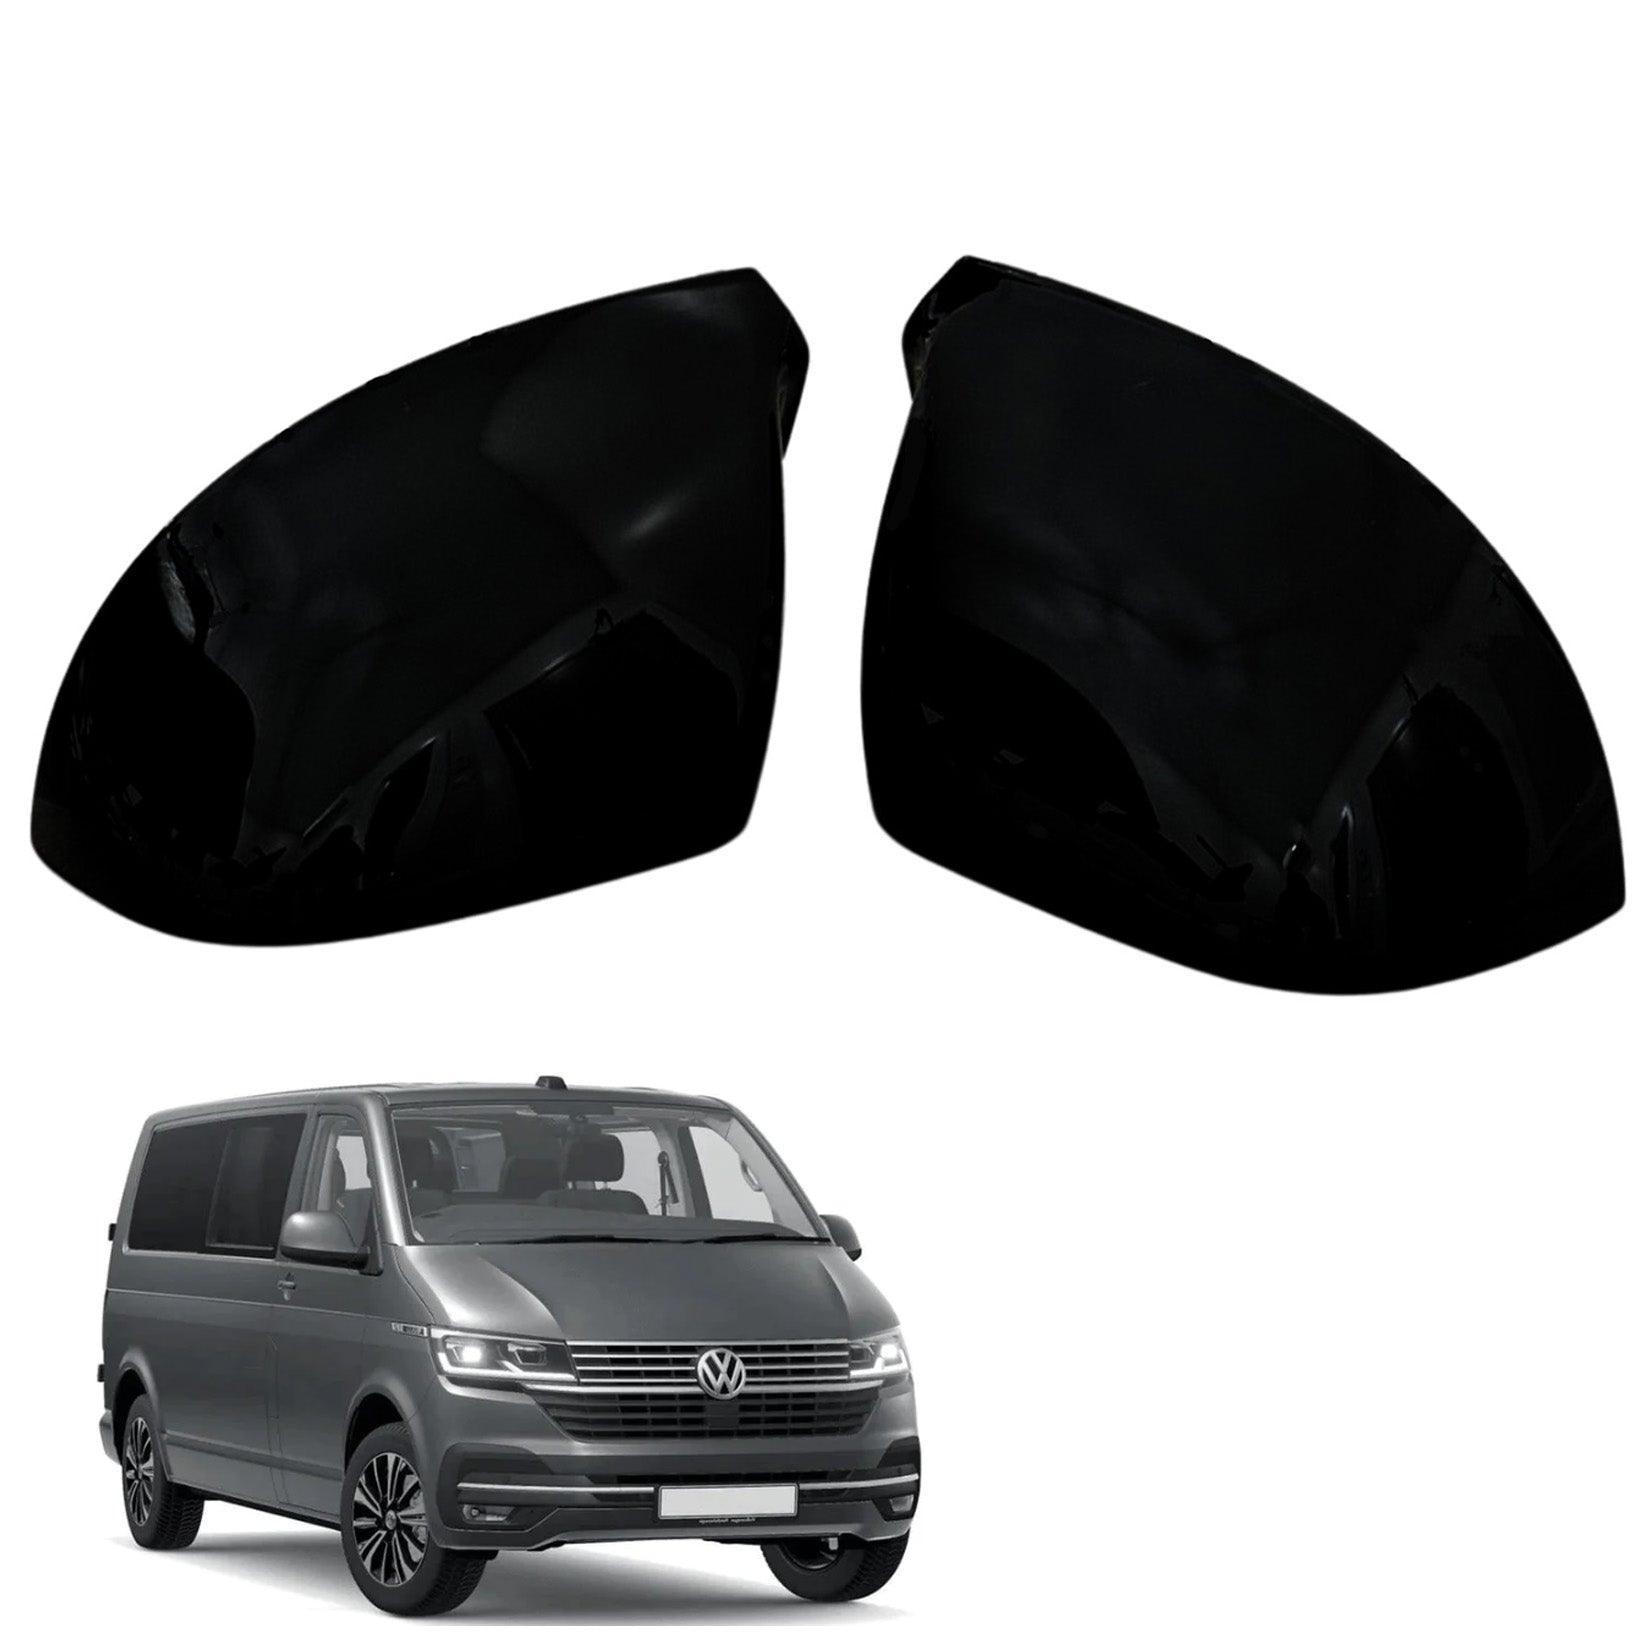 Vw Transporter T5 T6 T6.1 Mirror Covers In Gloss Black - Pair – Storm  Xccessories